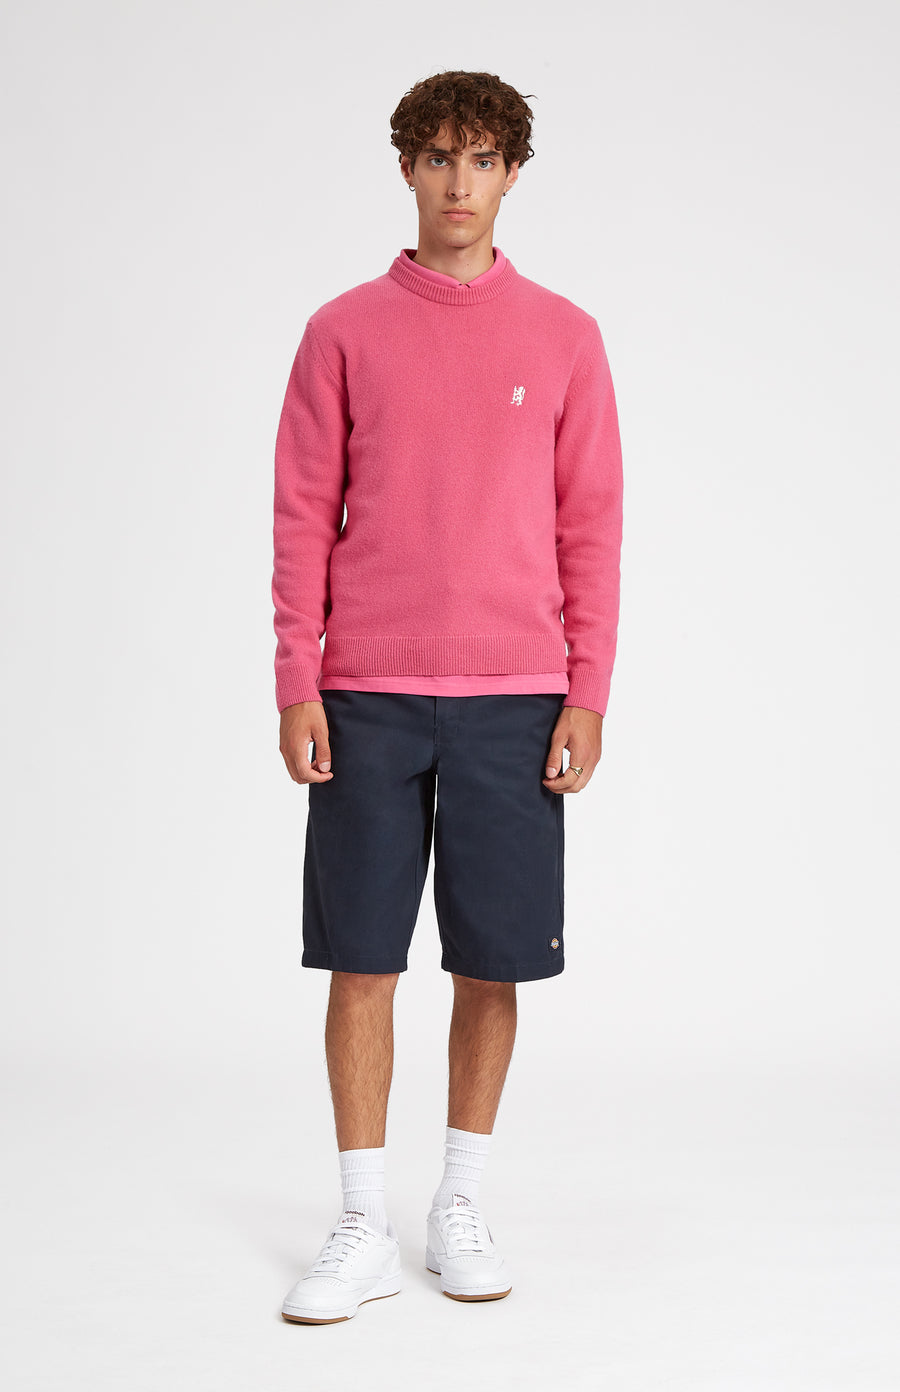 Pringle of Scotland Round Neck Lambswool Golf Jumper In Heather Pink